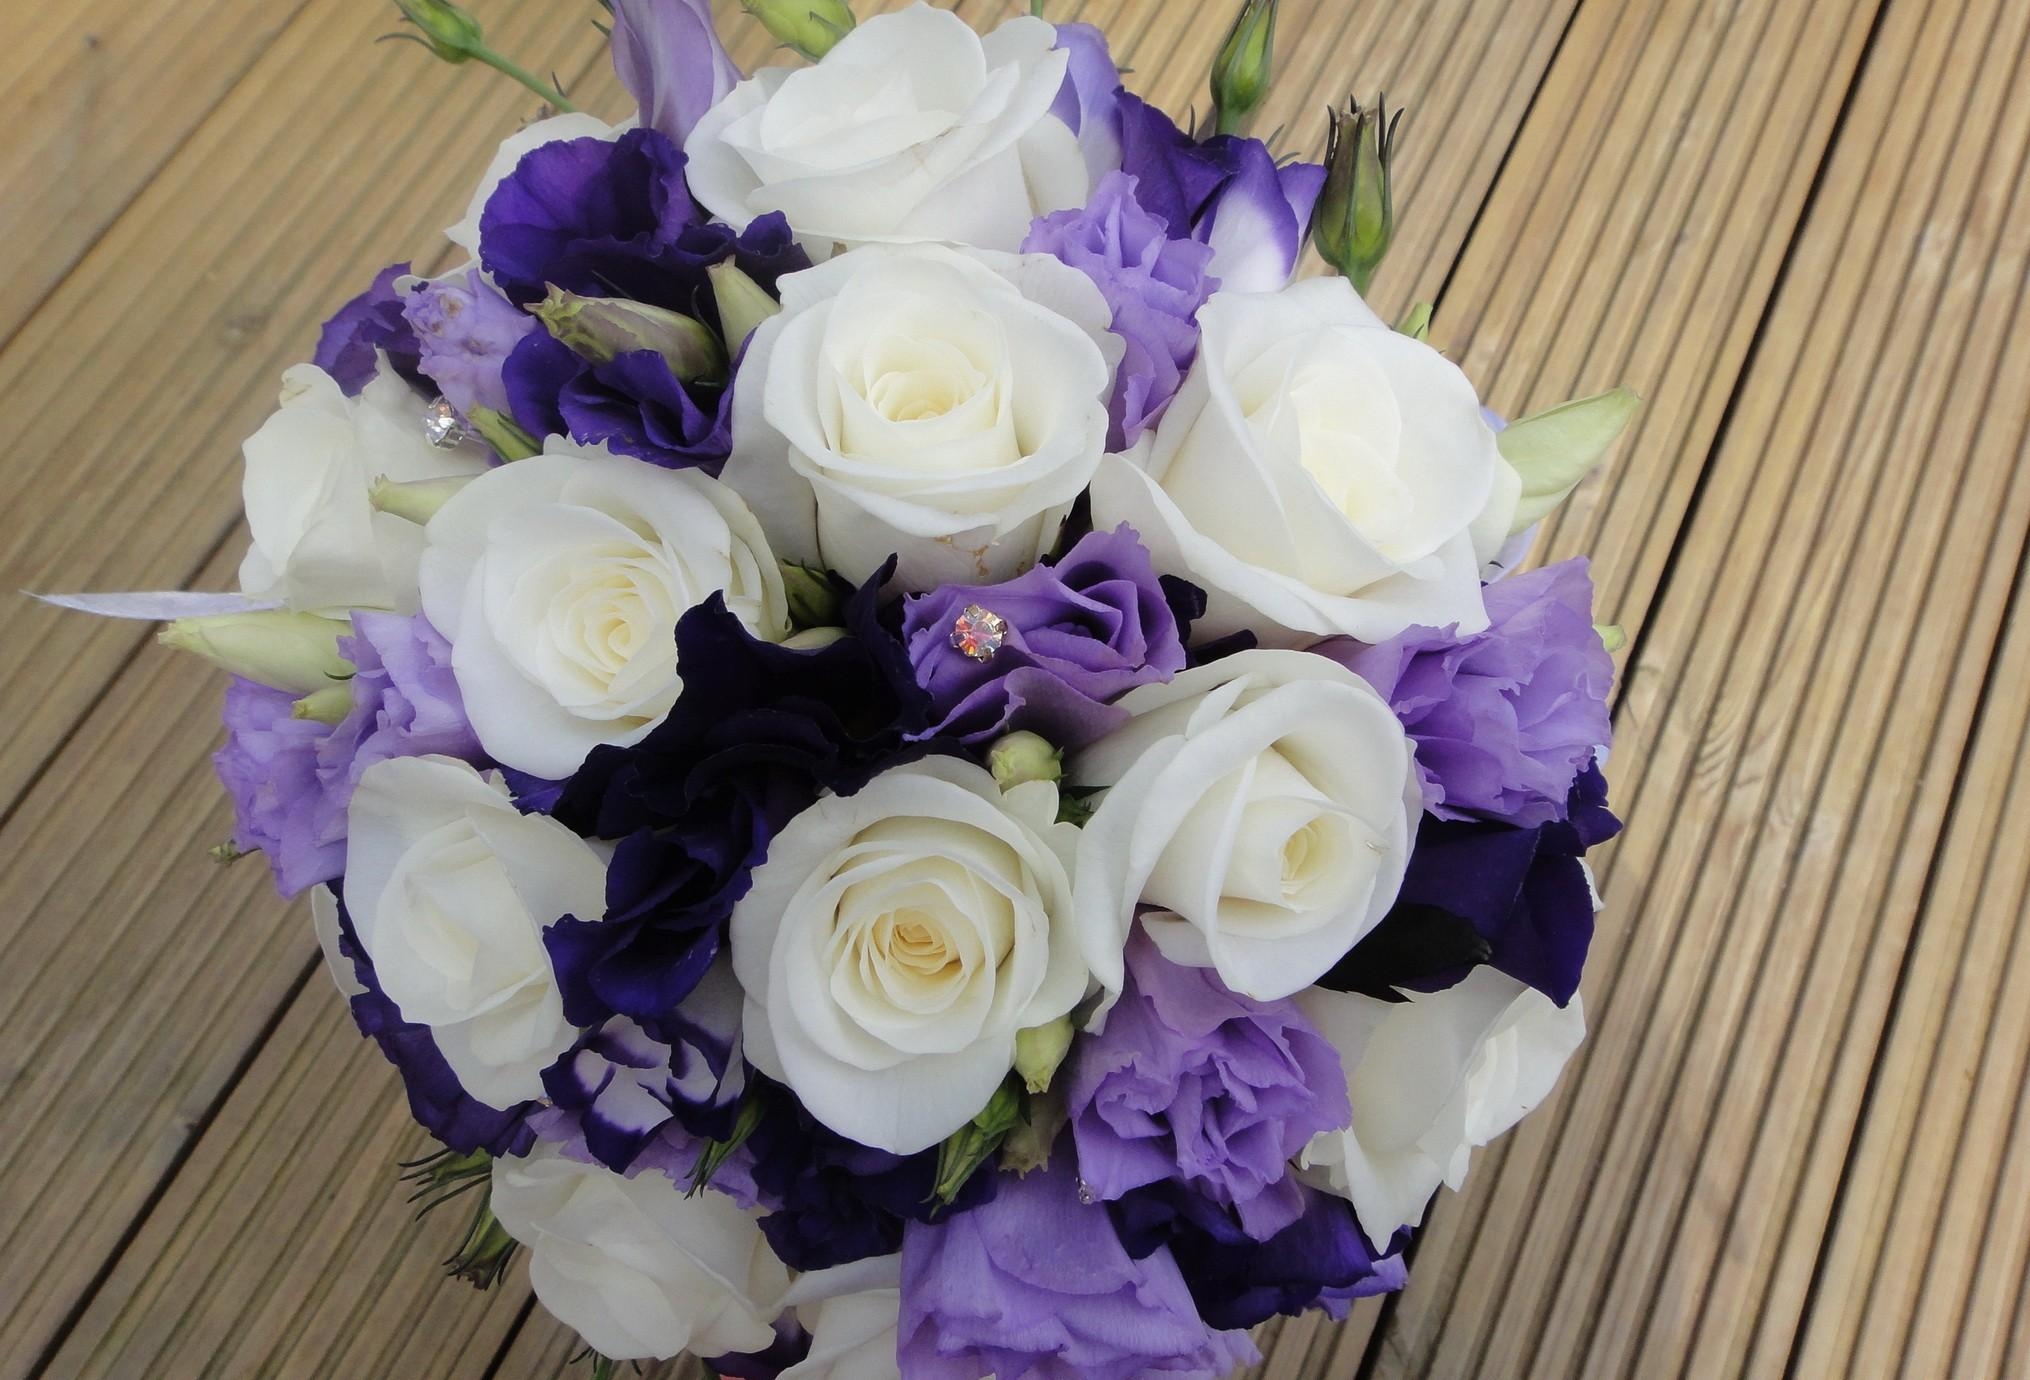 roses, flowers, registration, typography, bouquet, decoration, lisianthus russell, lisiantus russell QHD